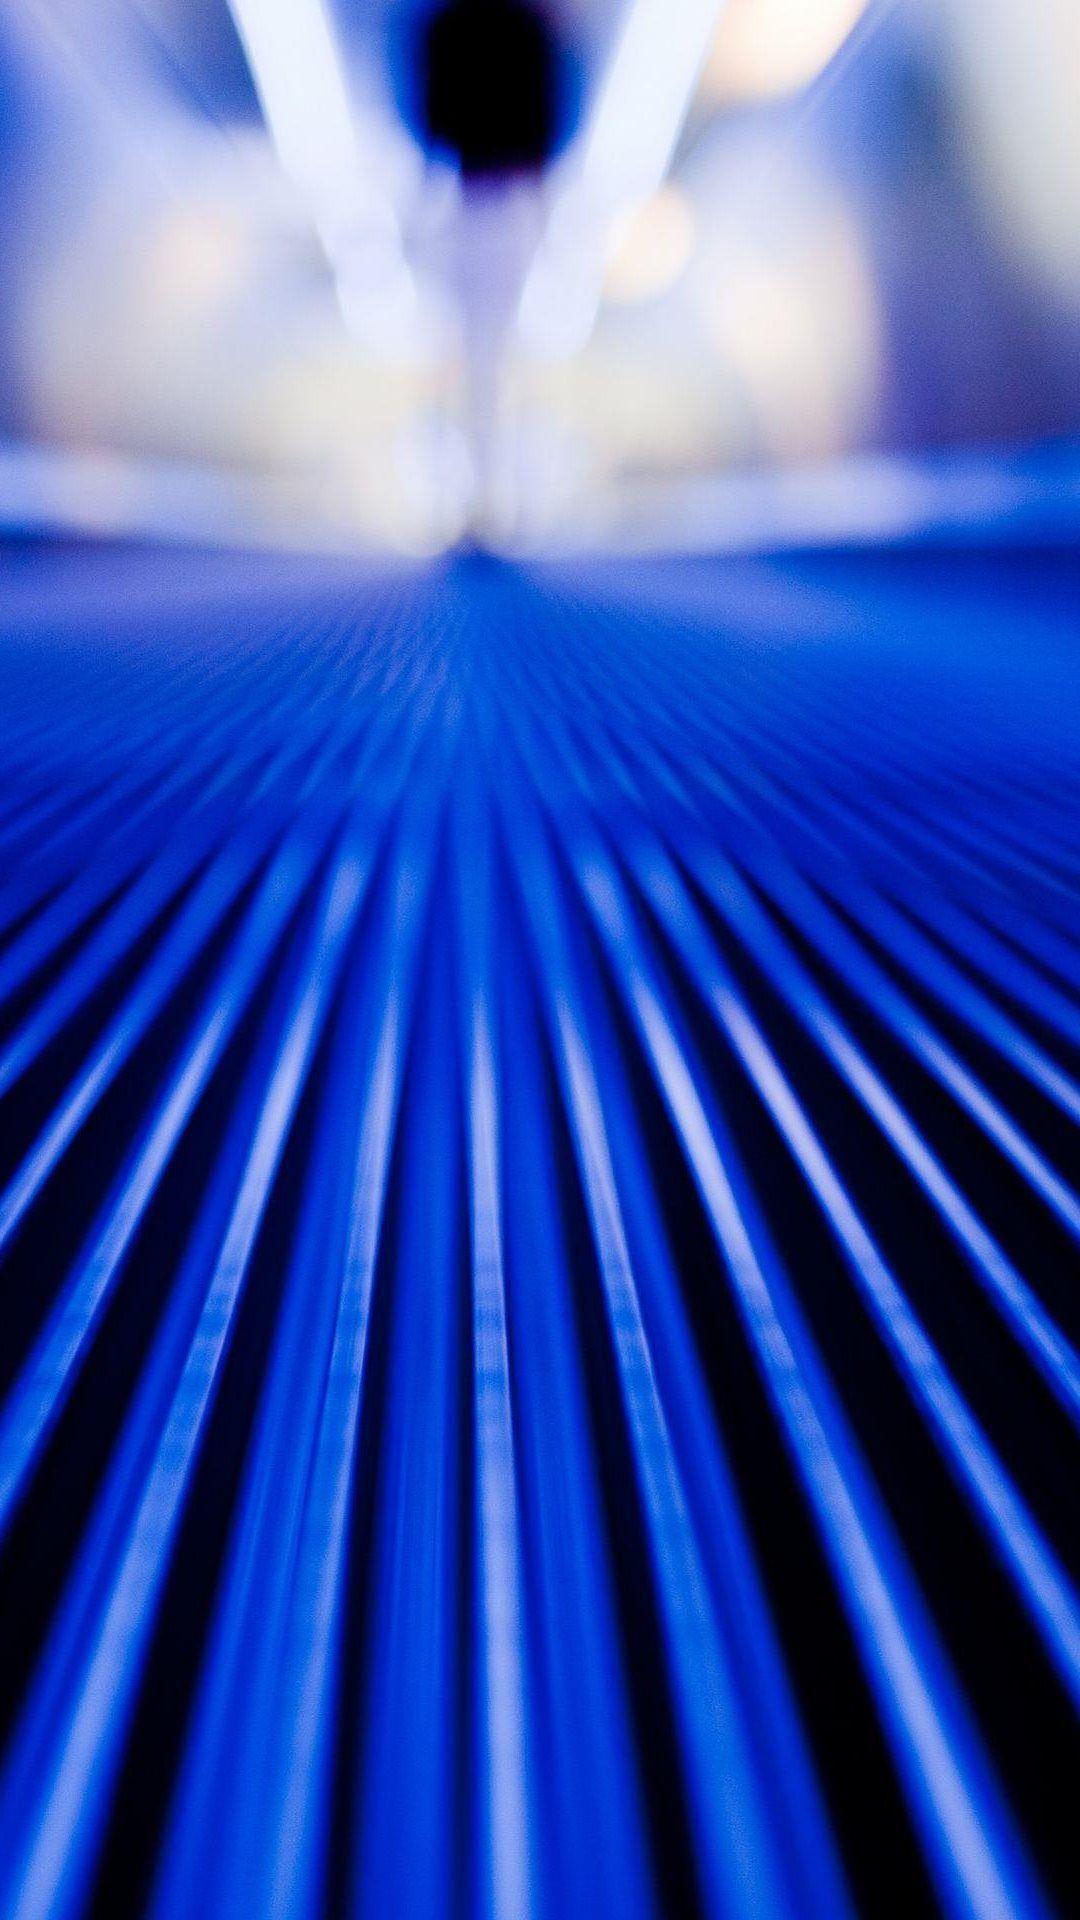 Moving Walkway Blue Stripes Close Up iPhone 6 Plus HD Wallpaper HD